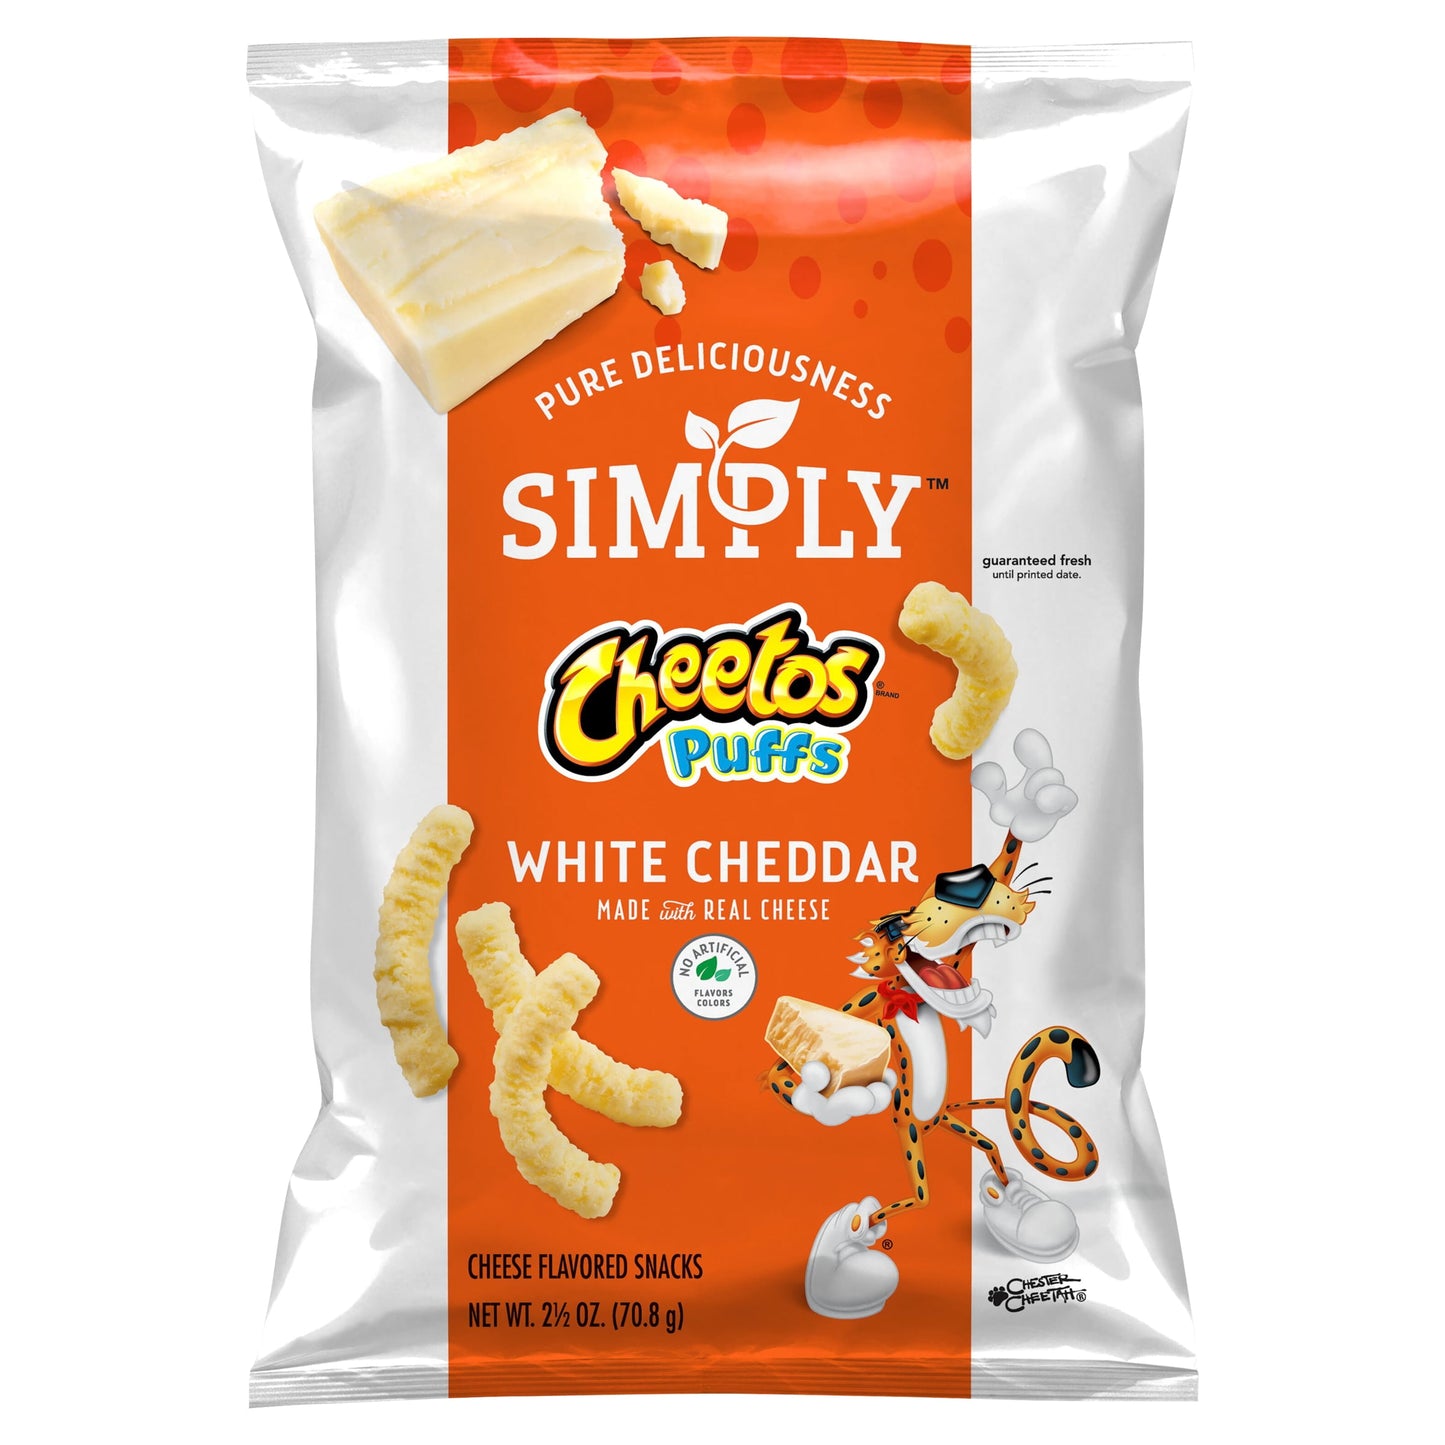 Simply Puffs White Cheddar Cheese Flavored Puffed Snacks, 2.5 Oz Bag